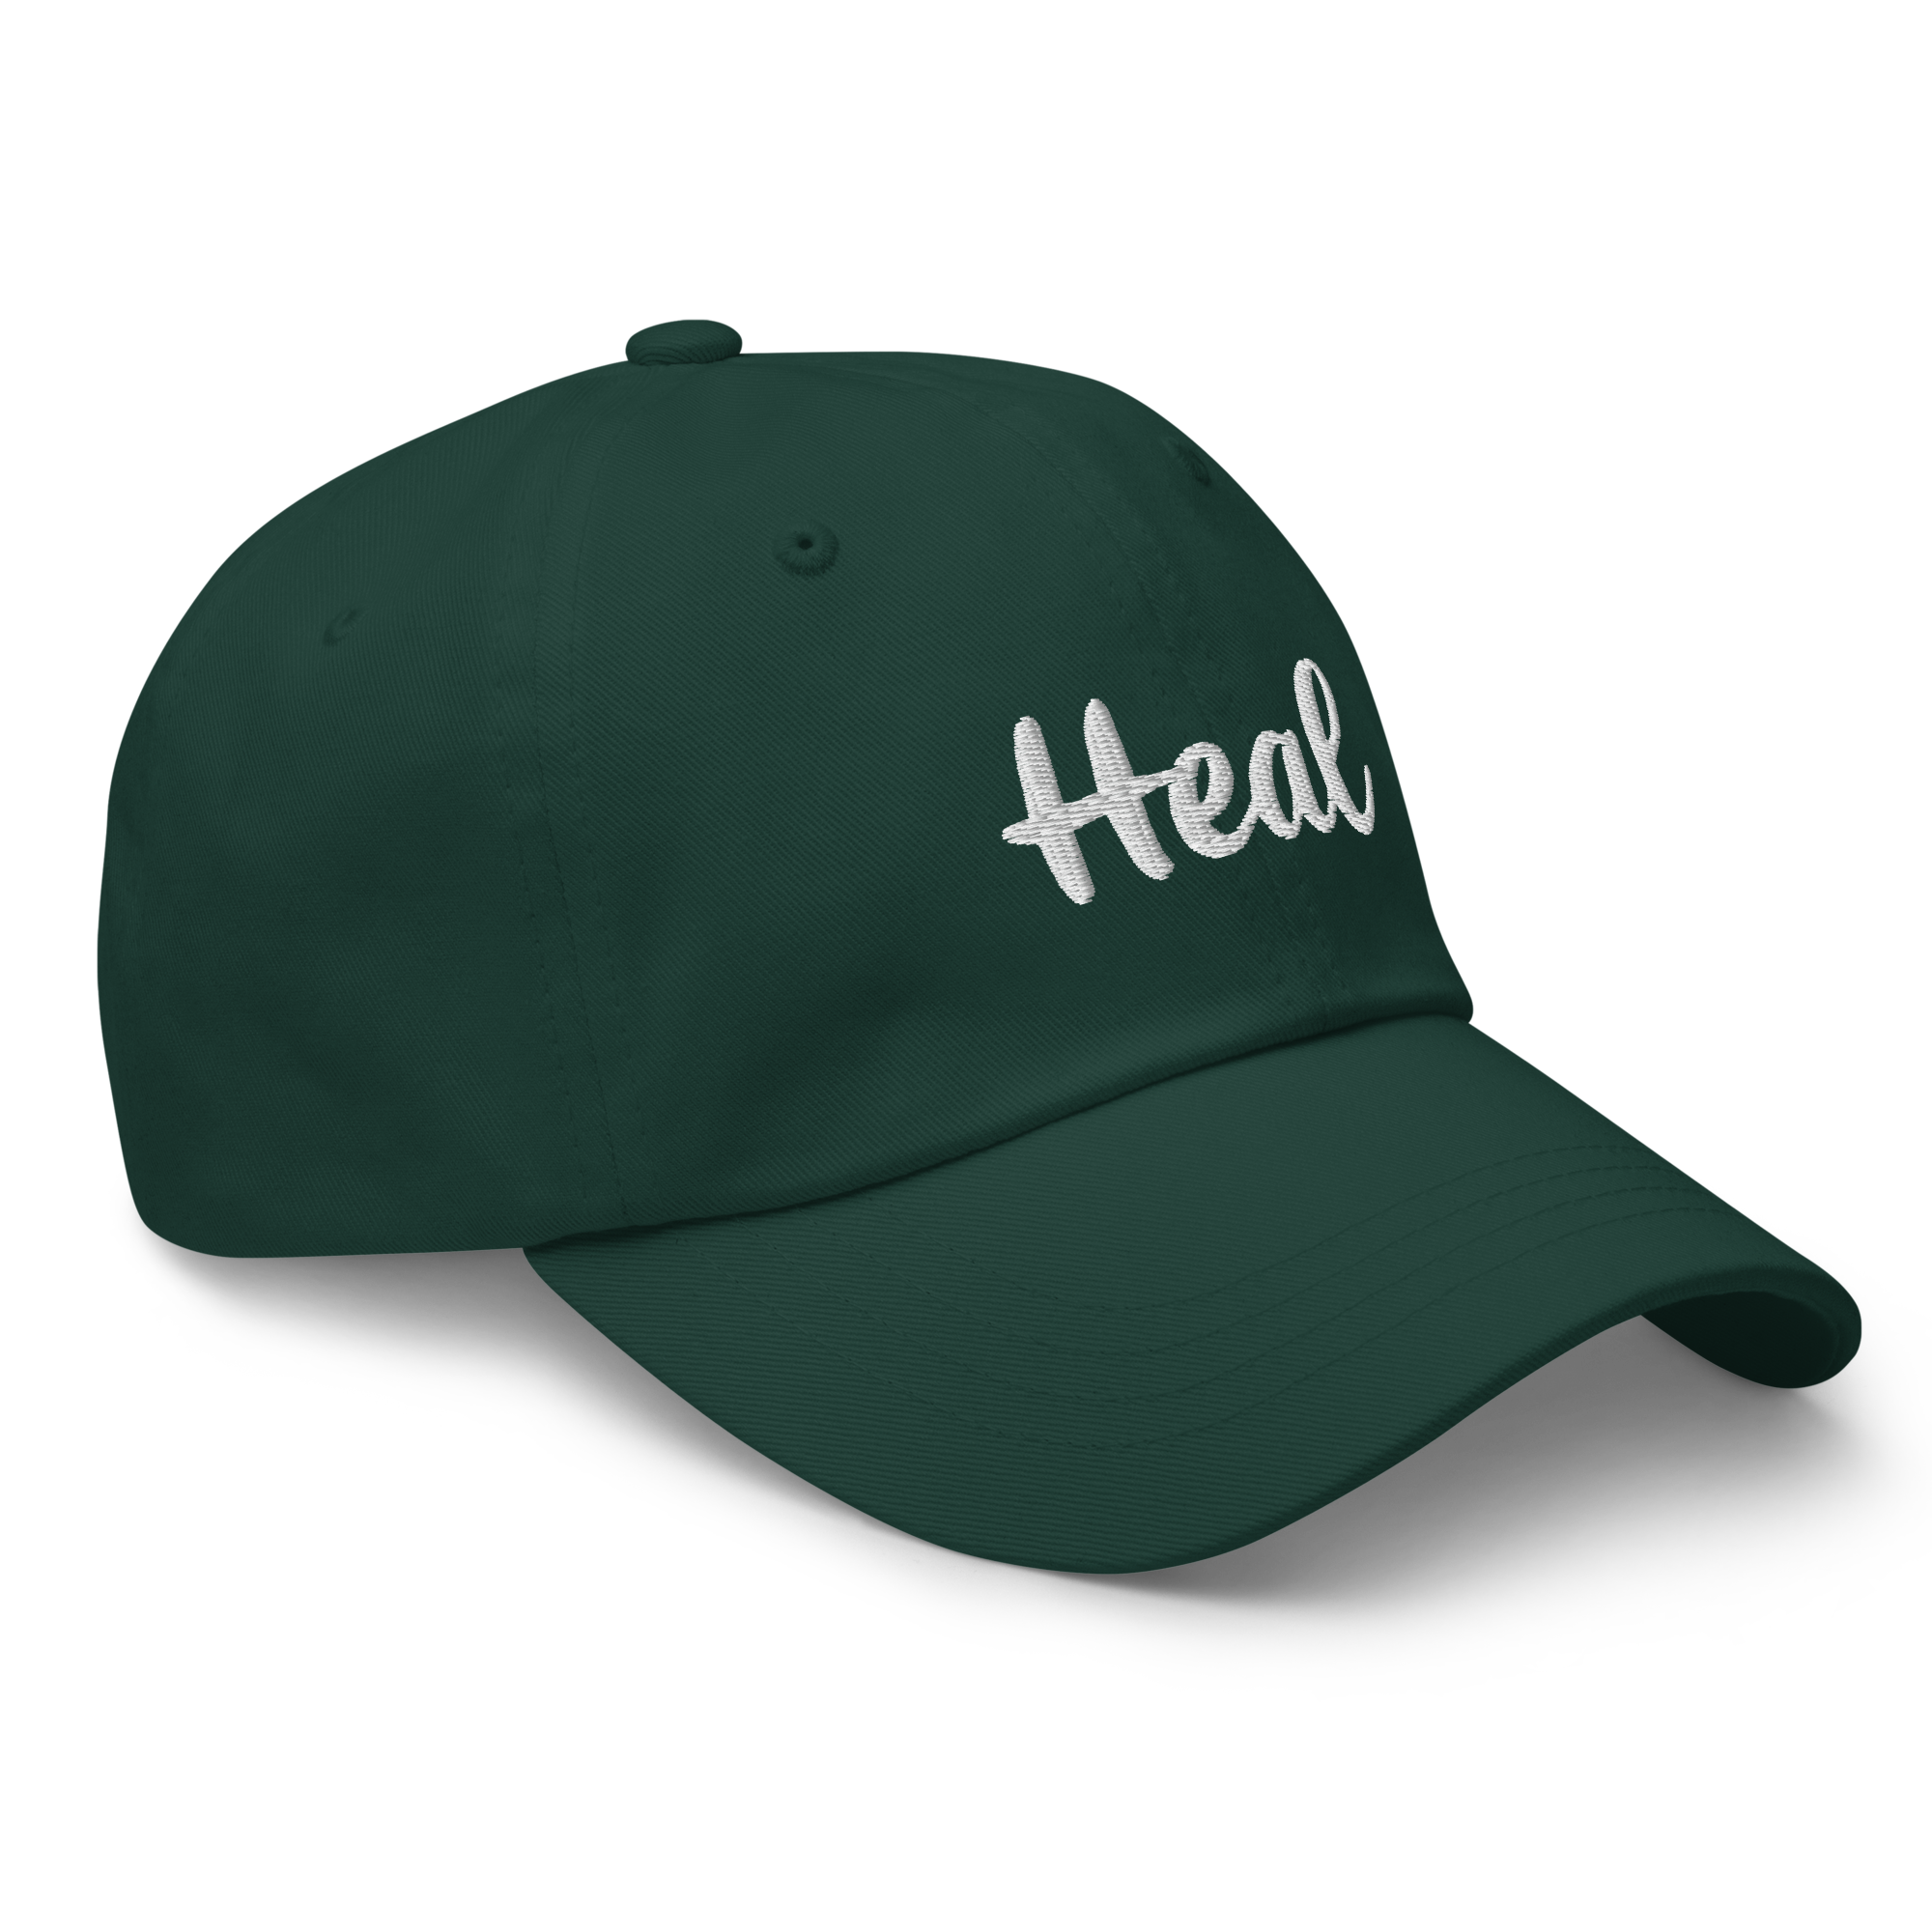 Heal (White Embroidered) Hat